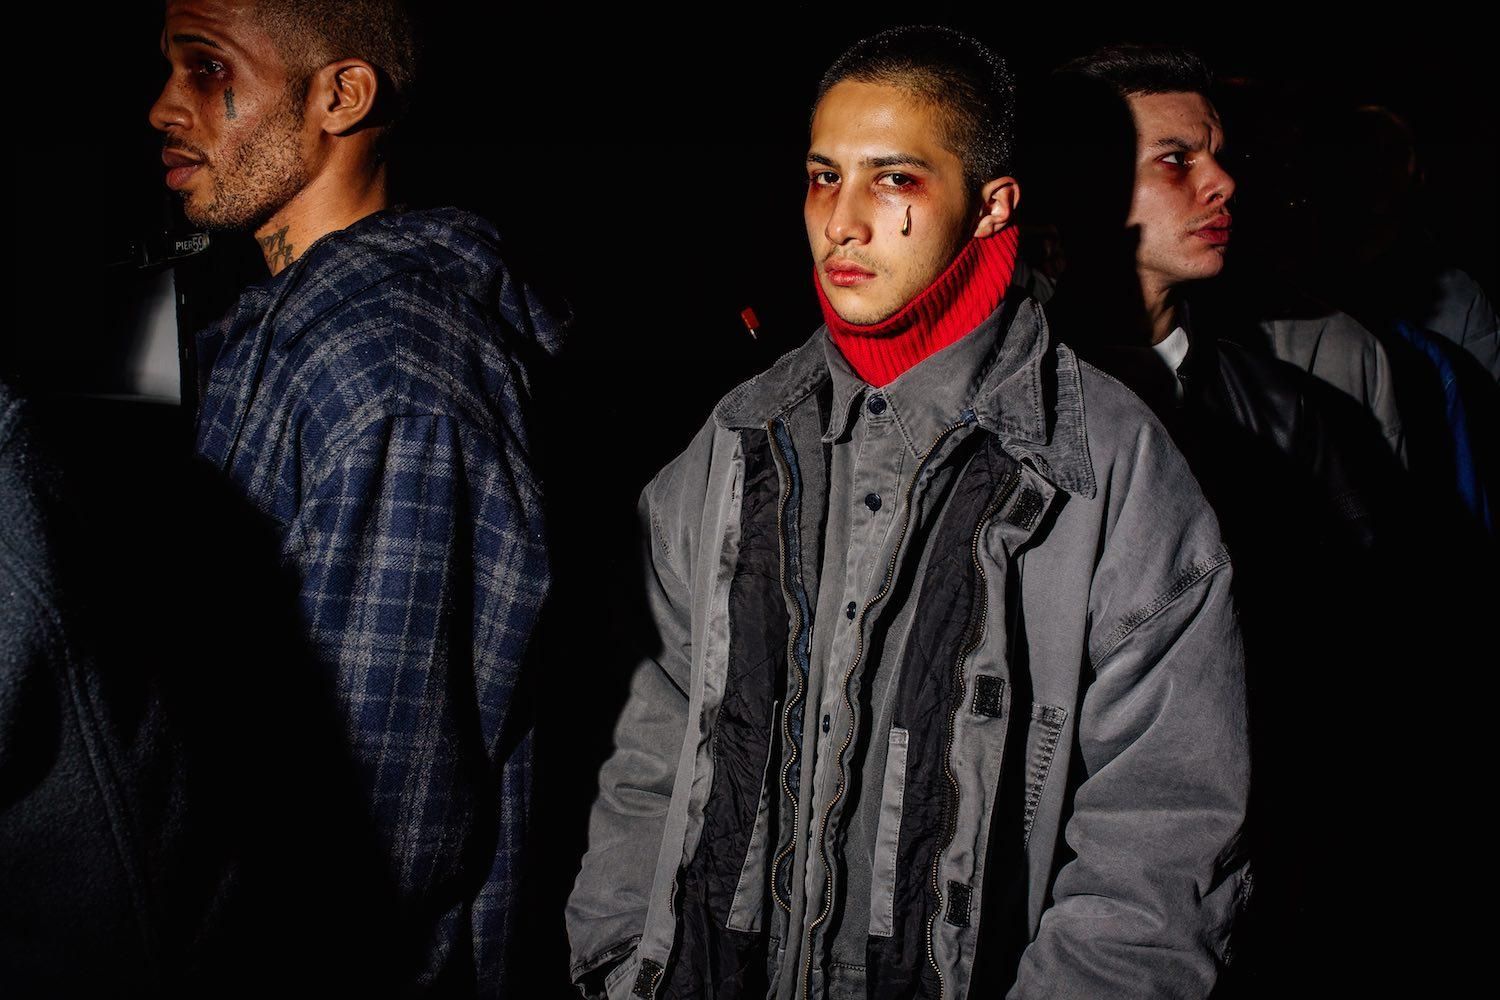 NYFW: Willy Chavarria Brought Somber, Tearful Realness to the Runway